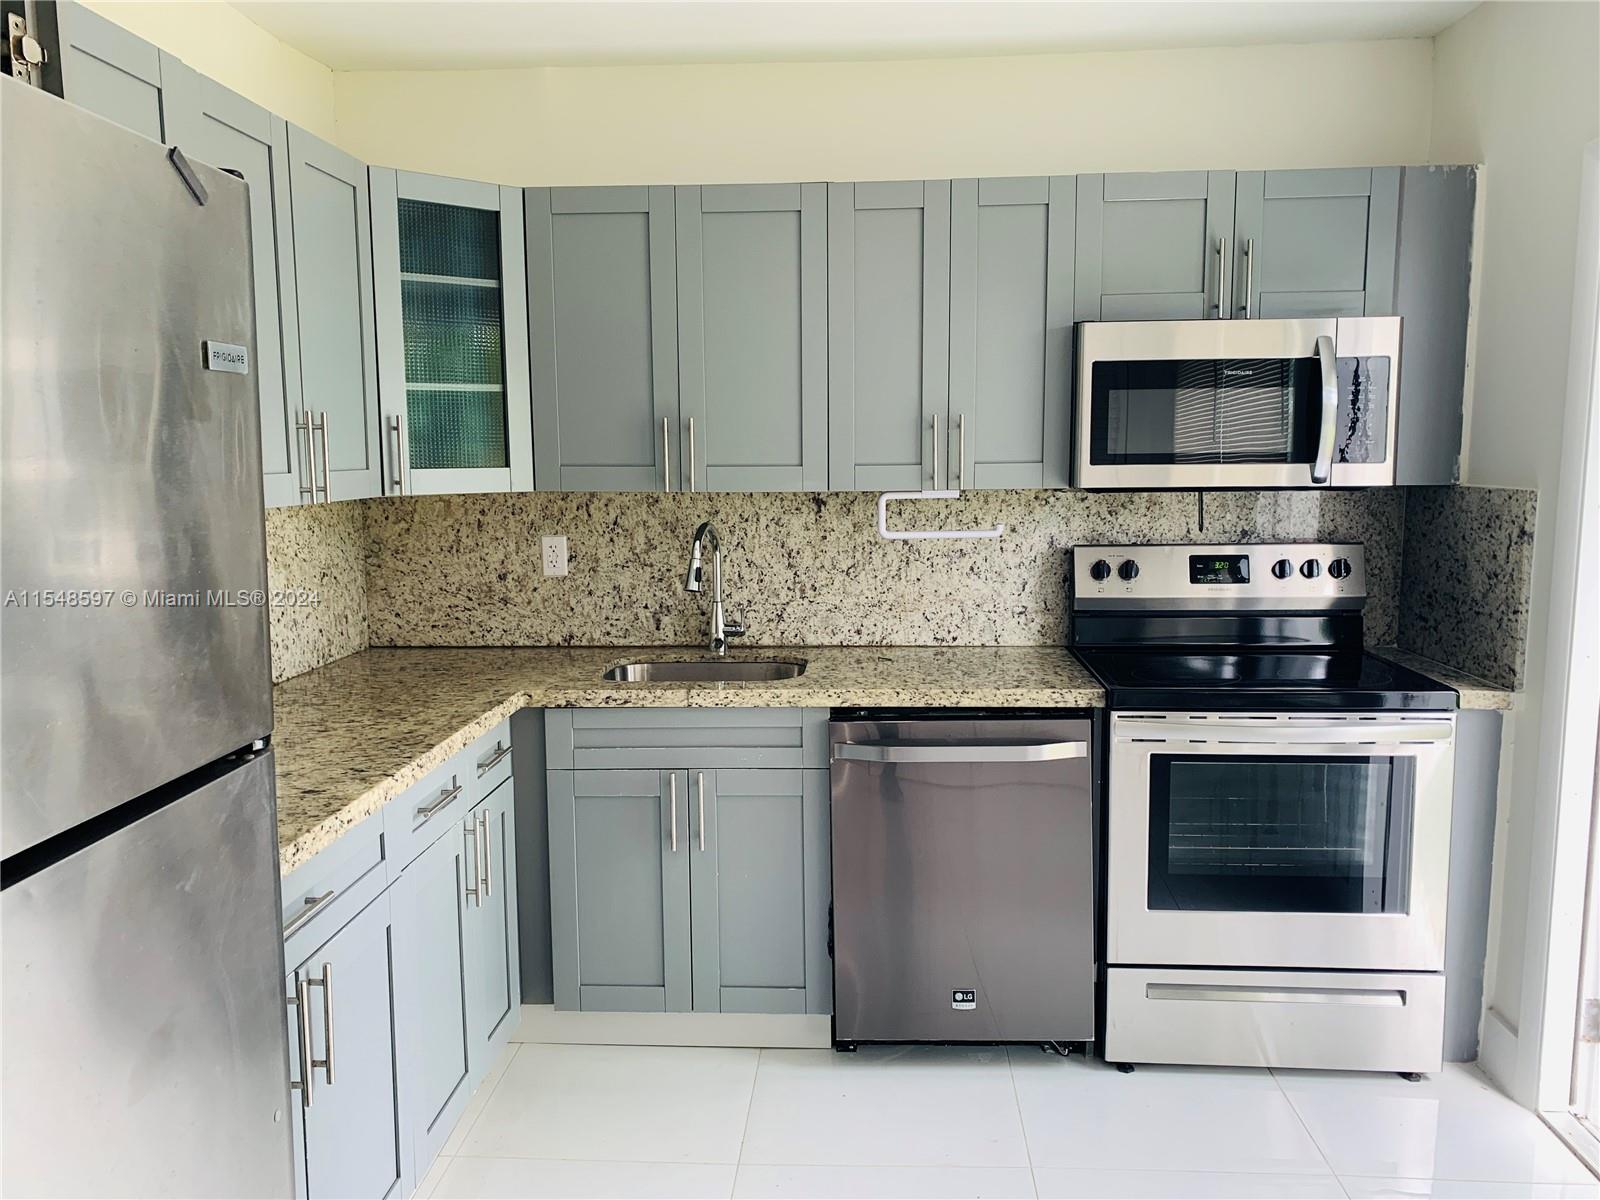 a kitchen with stainless steel appliances granite countertop a stove microwave and refrigerator